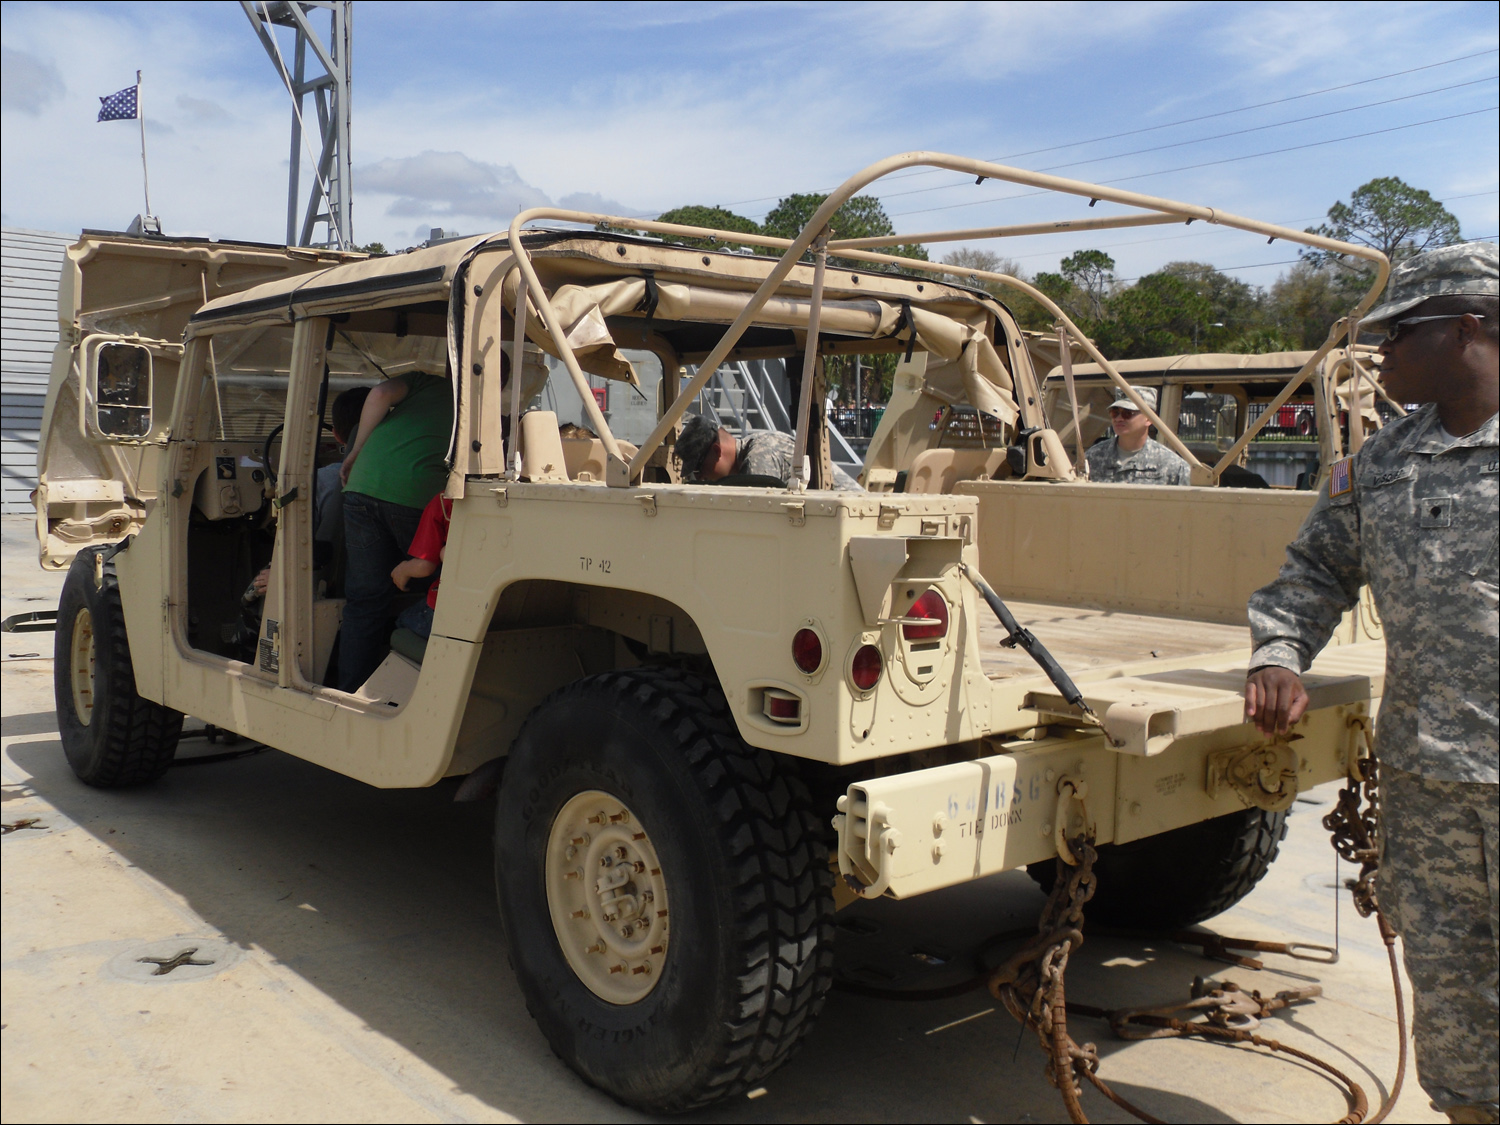 Humvee's aboard the US Army LCU (Landing Craft Unit) New Orleans